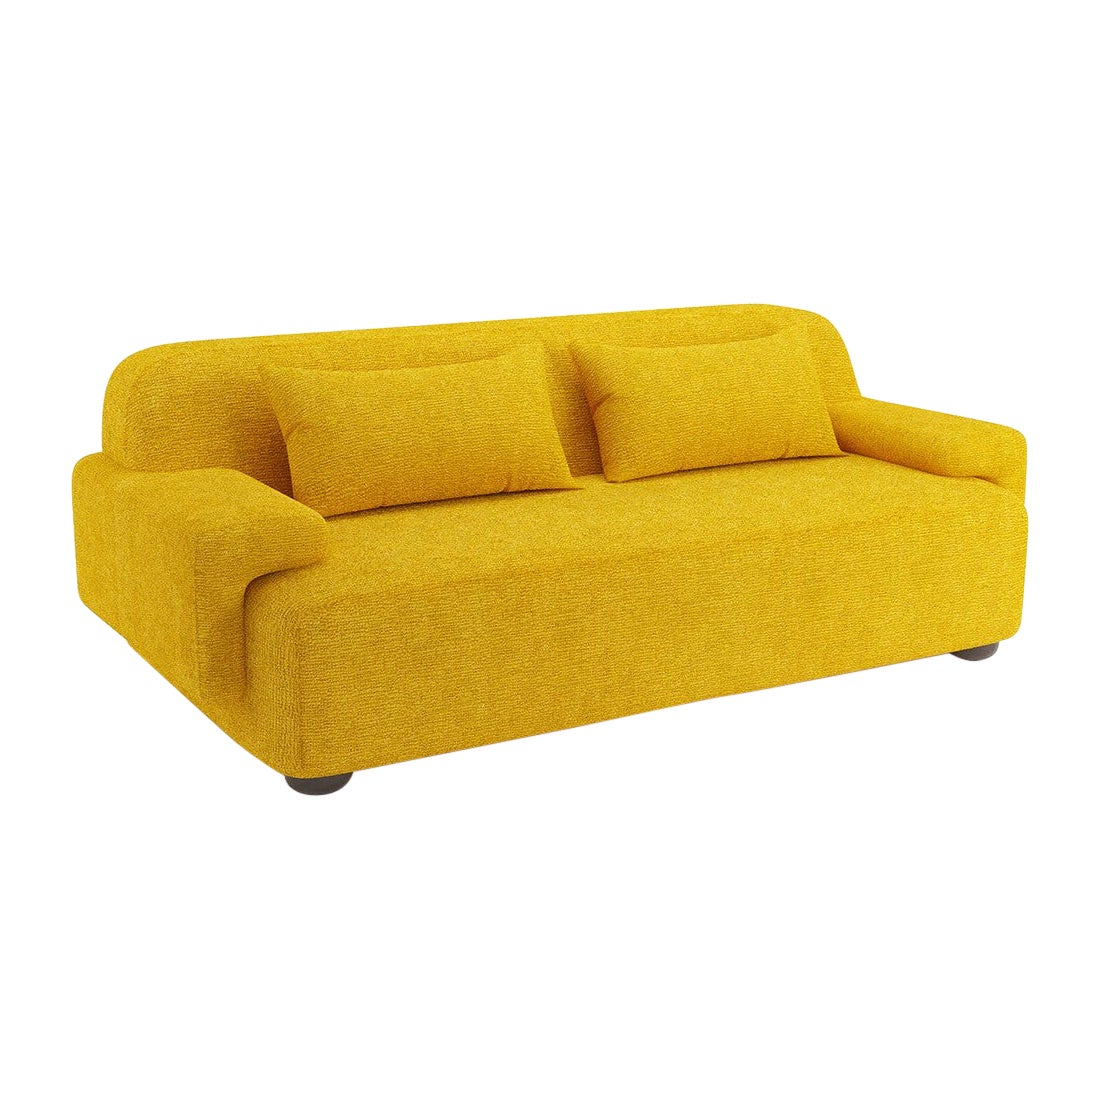 Popus Editions Lena 2.5 Seater Sofa in Corn Megeve Fabric with Knit Effect For Sale